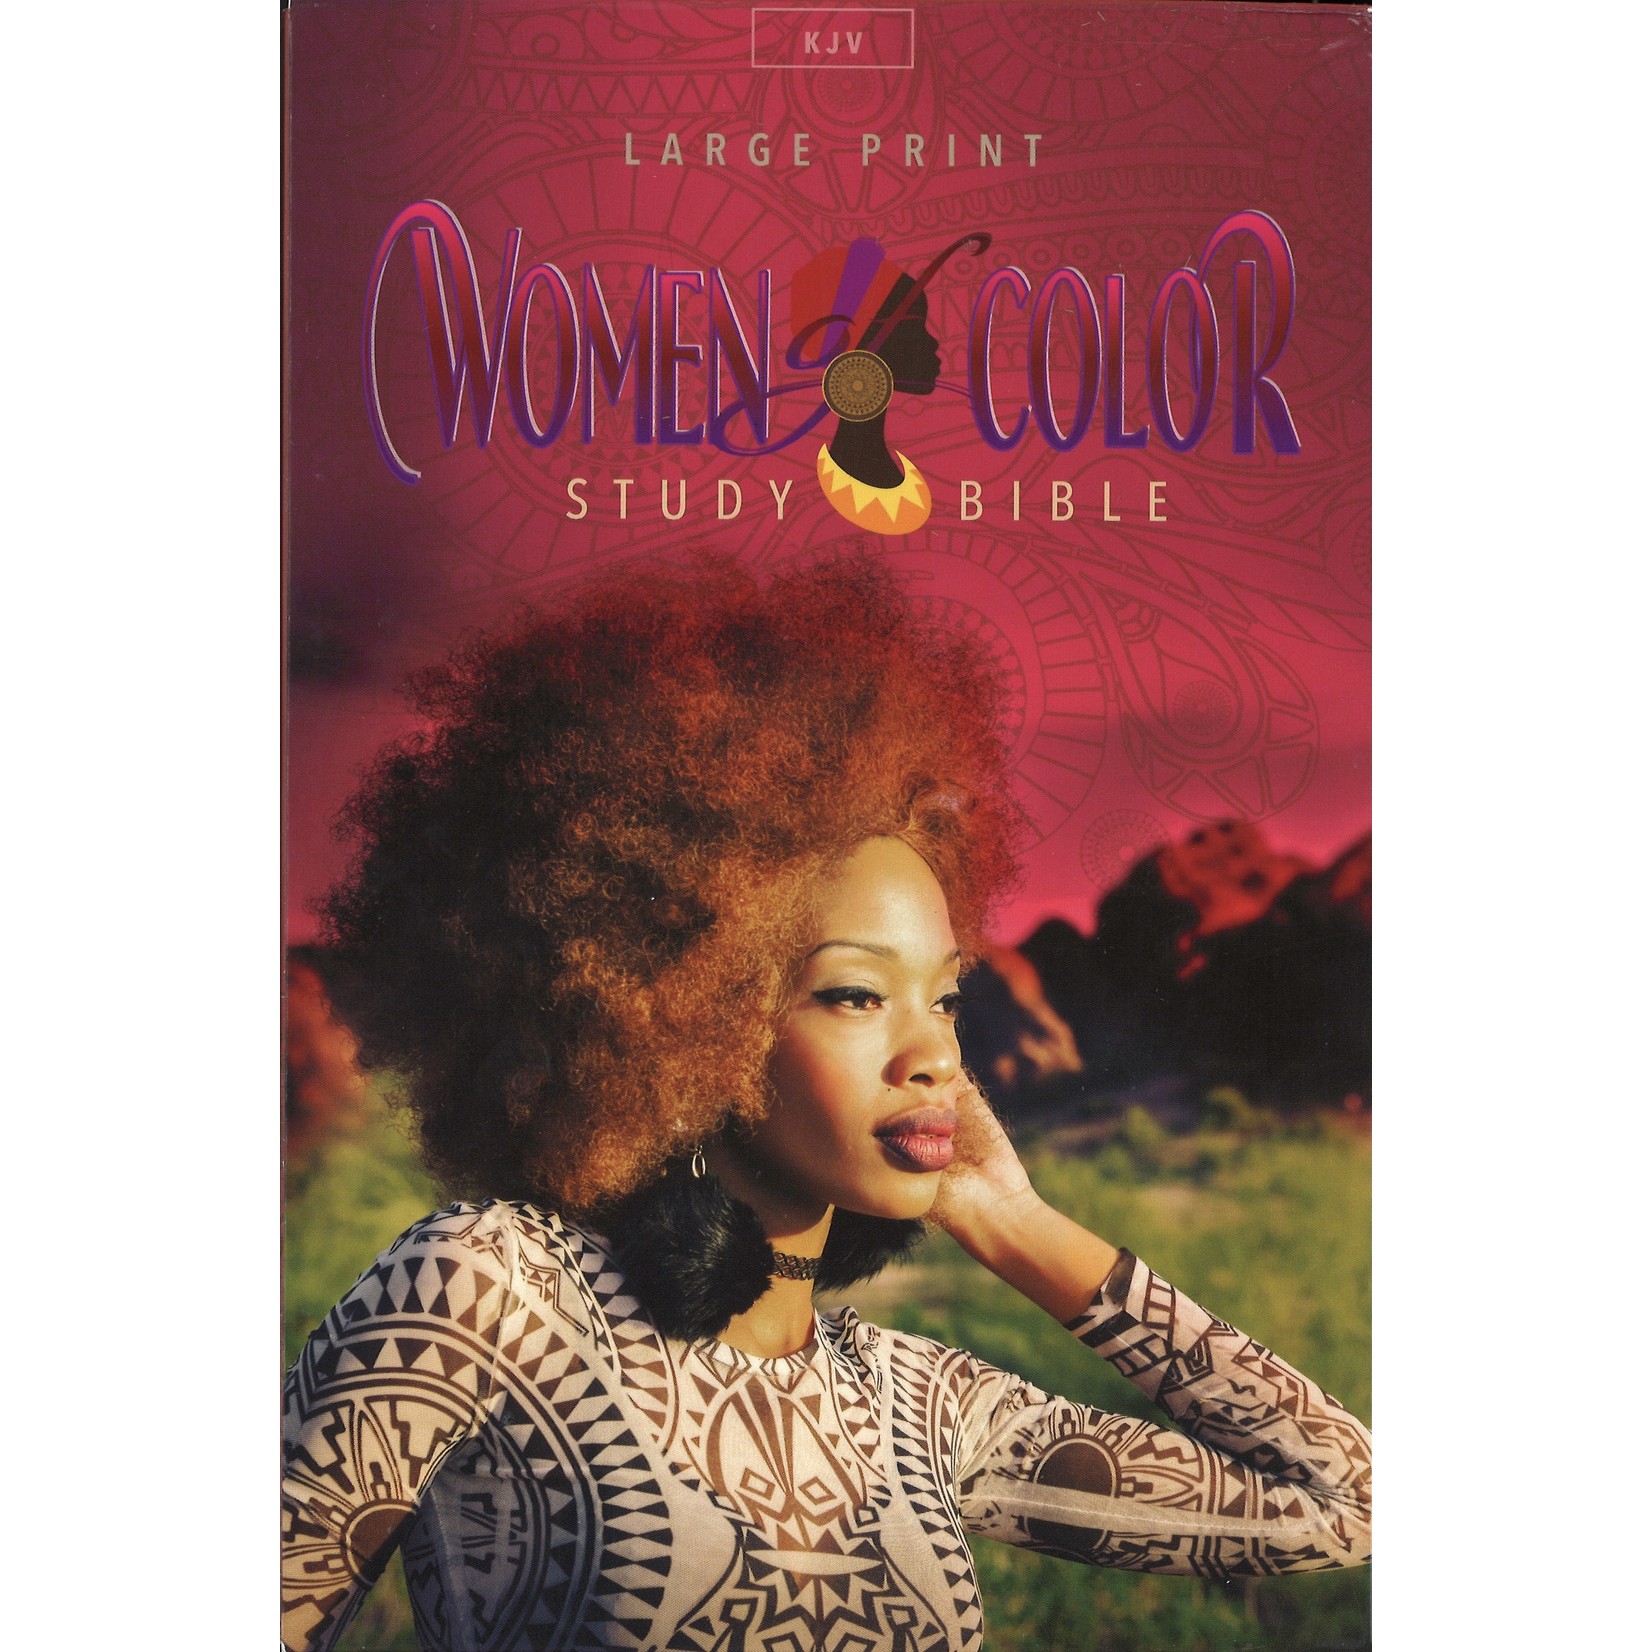 WOMEN OF COLOR STUDY BIBLE - KJV LARGE PRINT SOFTCOVER